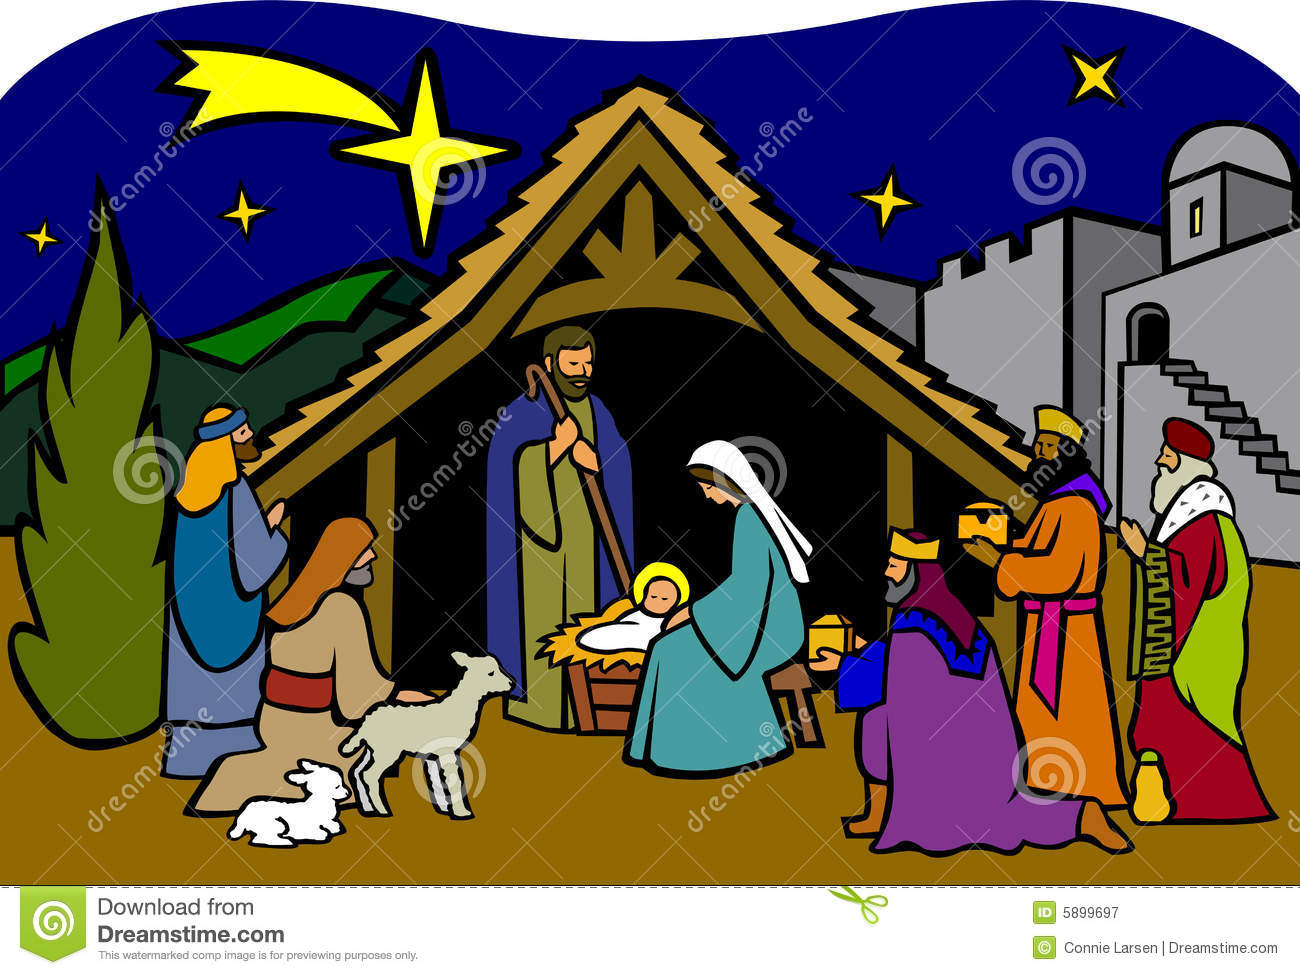 Holy Family Nativity in Color